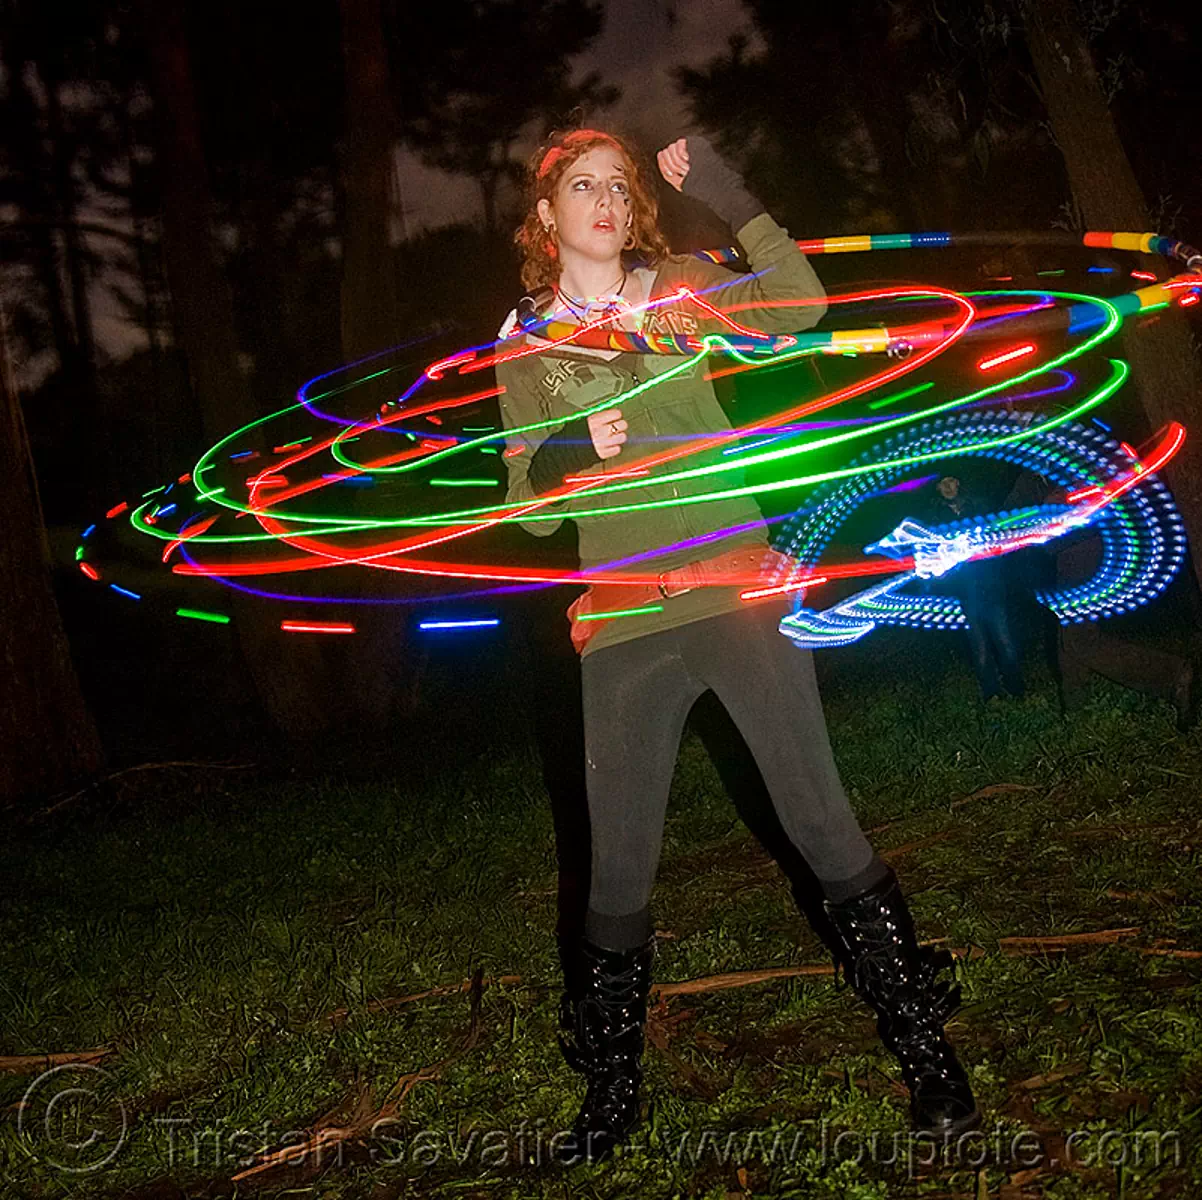 girl spinning a hula hoop with photon LED lights, full moon party, glowing, golden gate park, hooper, hula hoop, hula hooping, led hoop, led lights, light hoop, microlights, night, rave lights, woman